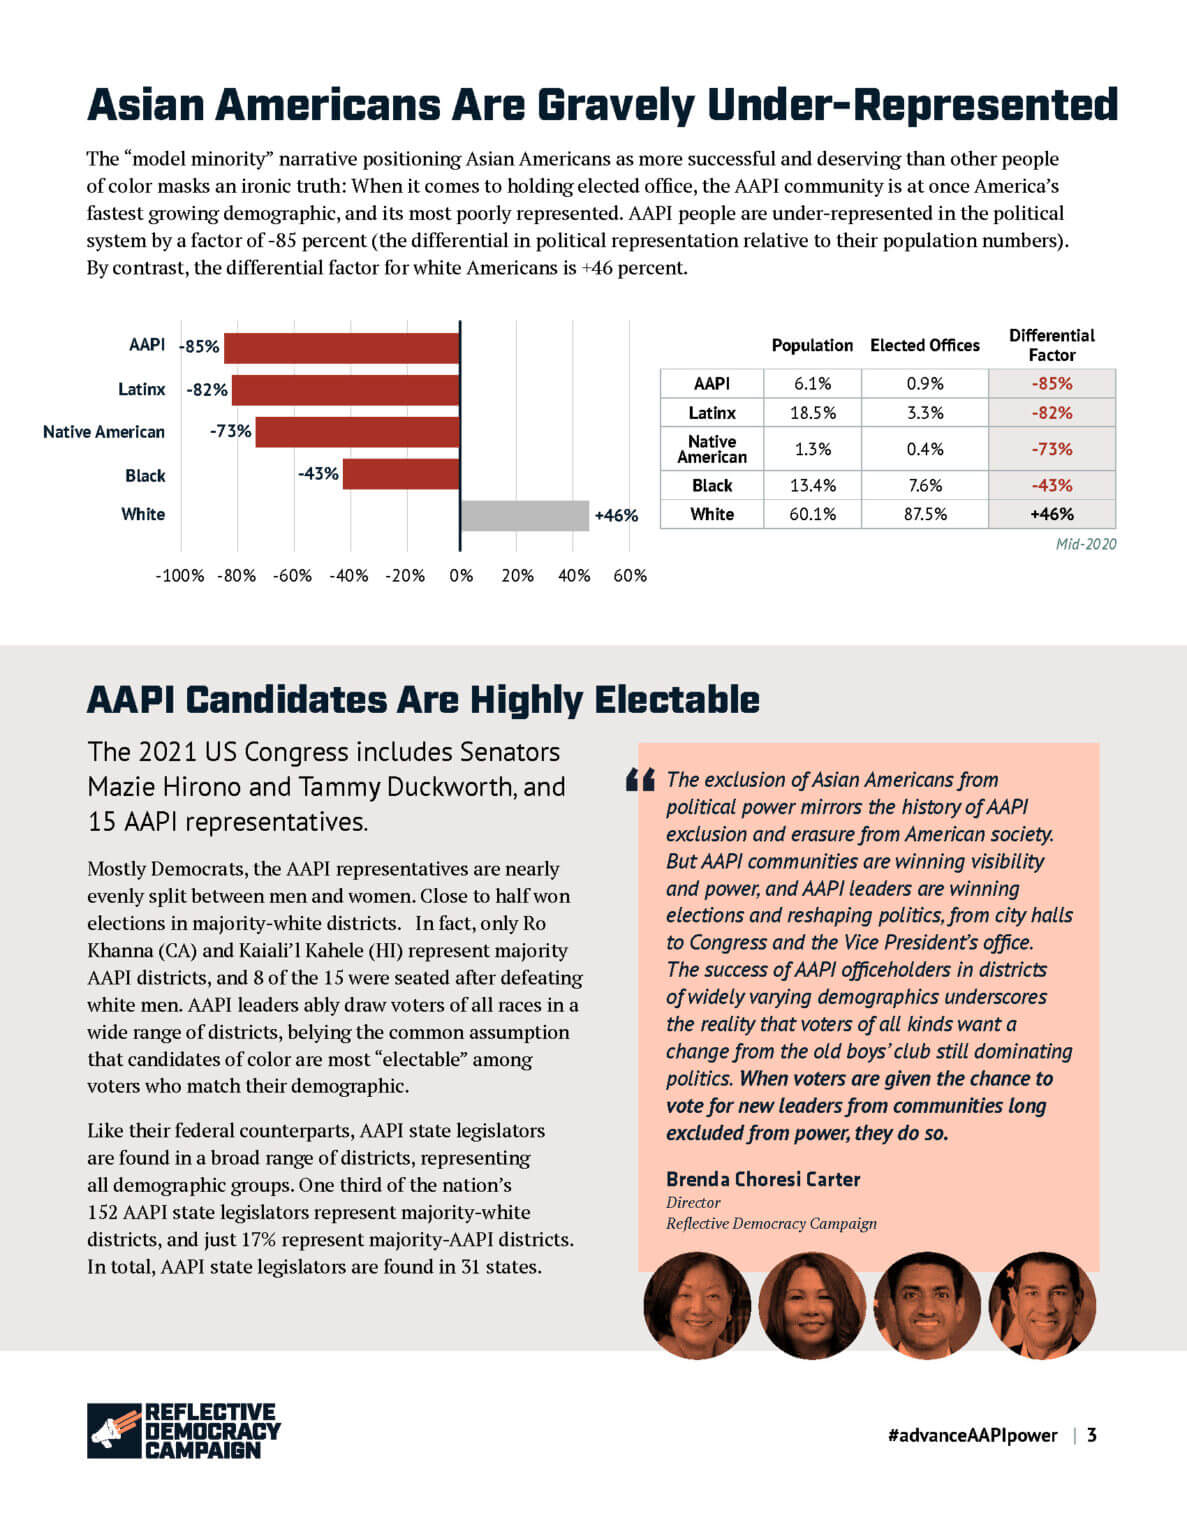 A page from the #advanceAAPIpower: Asian American Pacific Islander (AAPI) Political Leadership report